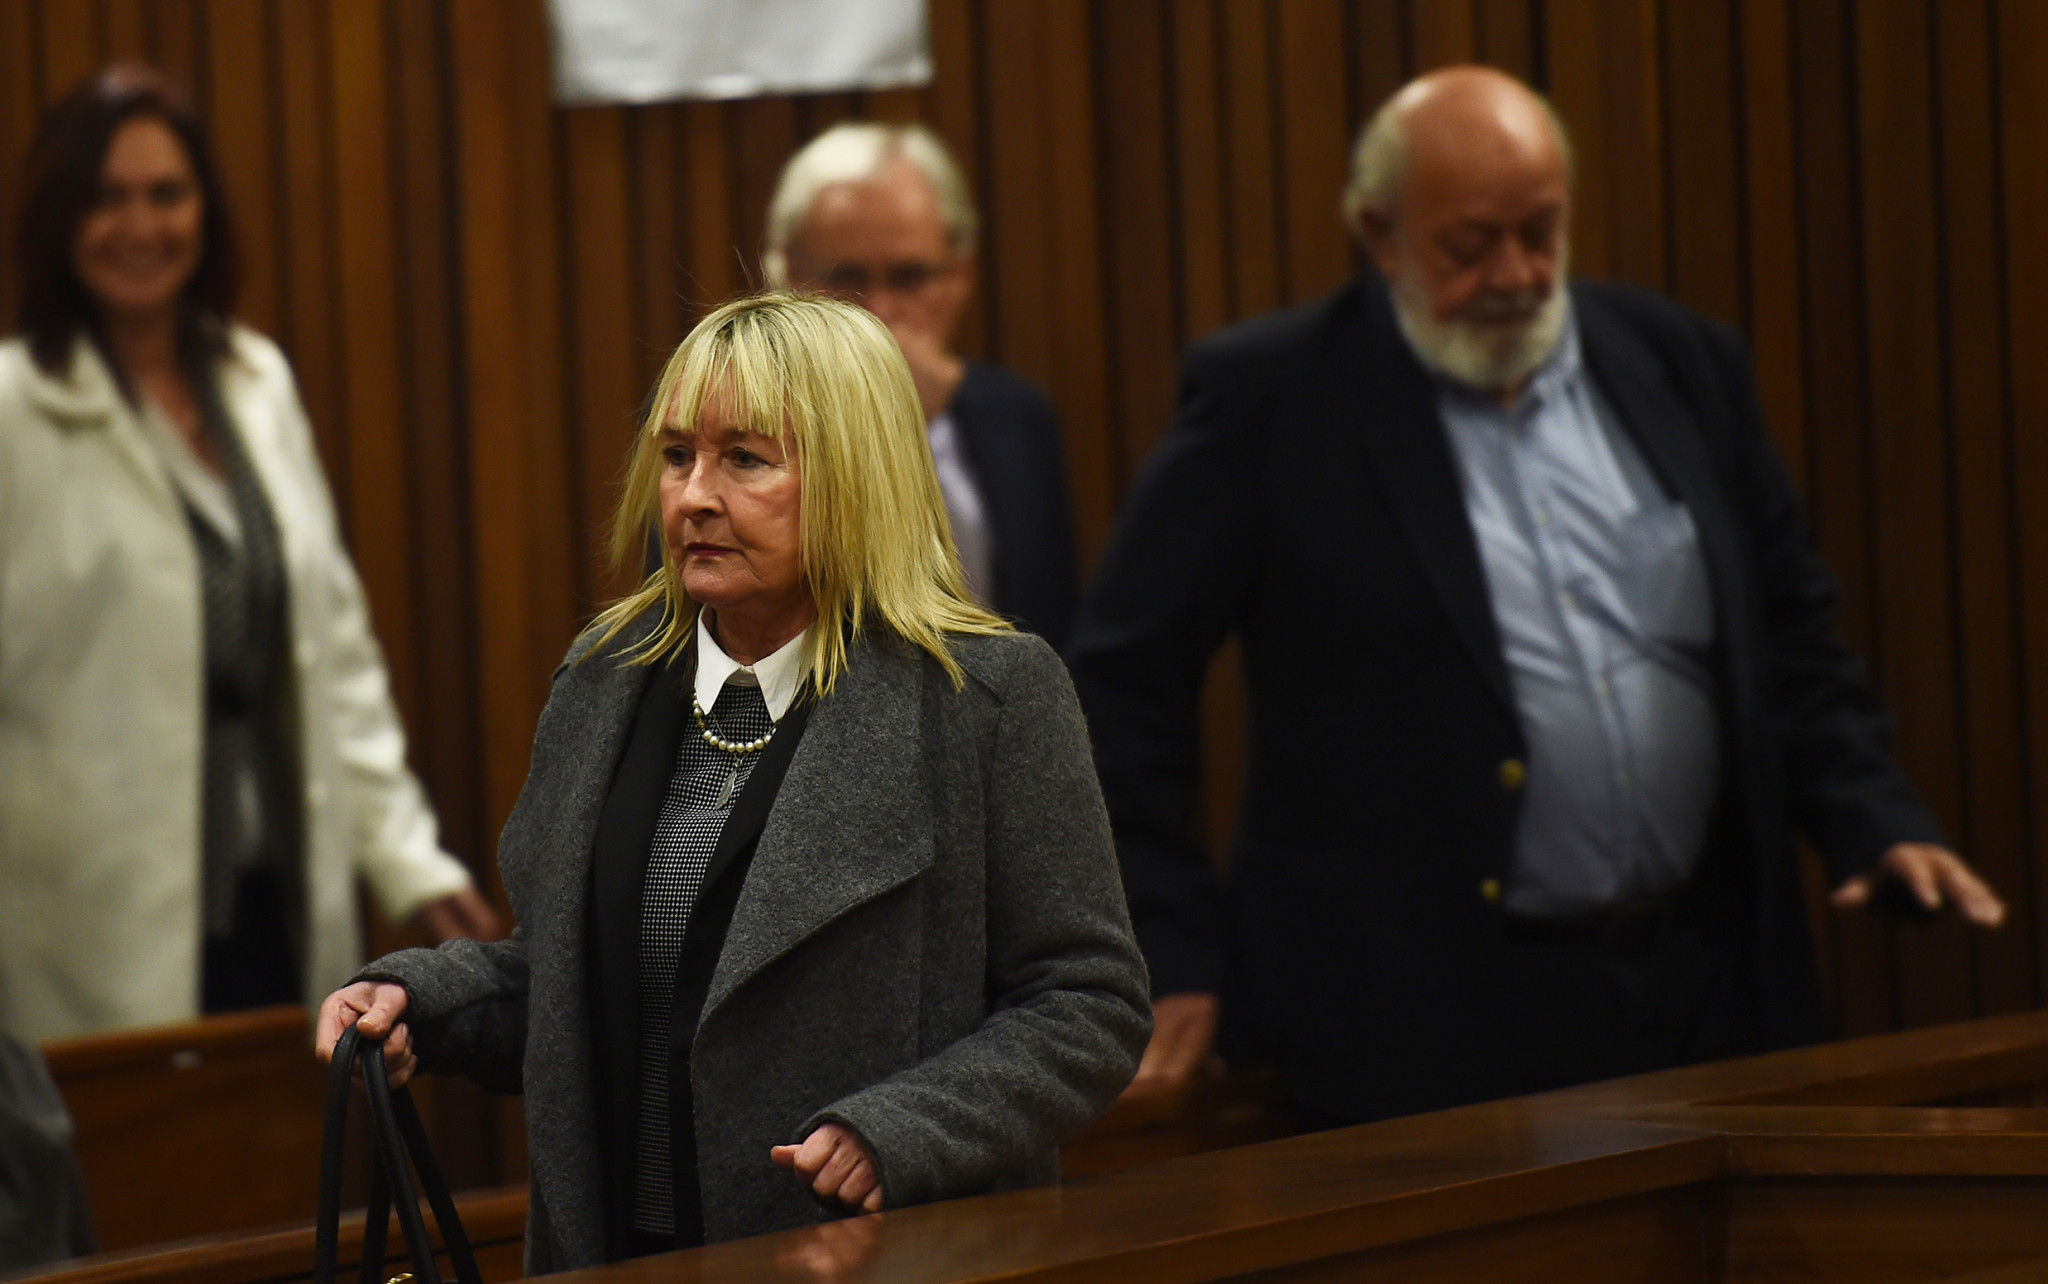 Mother of Steenkamp "shook with anger" after BBC failed to name daughter in Pistorius documentary trailer